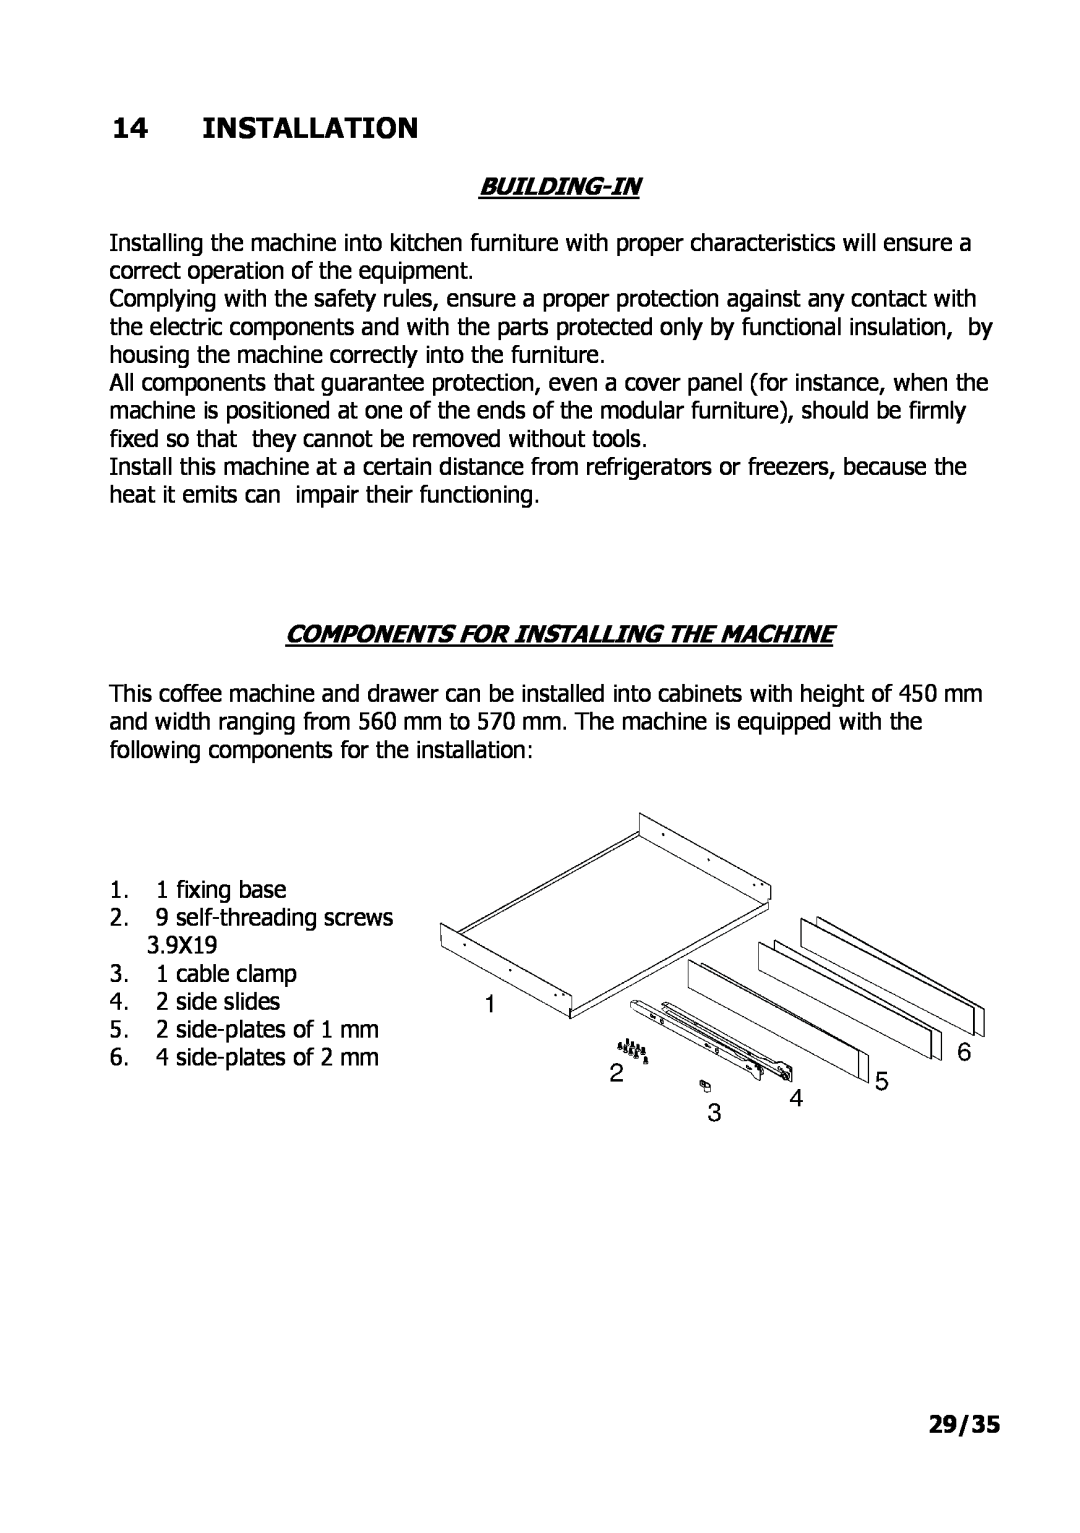 Electrolux PE 9038-m fww installation instructions Installation, Building-In, Components For Installing The Machine, 29/35 